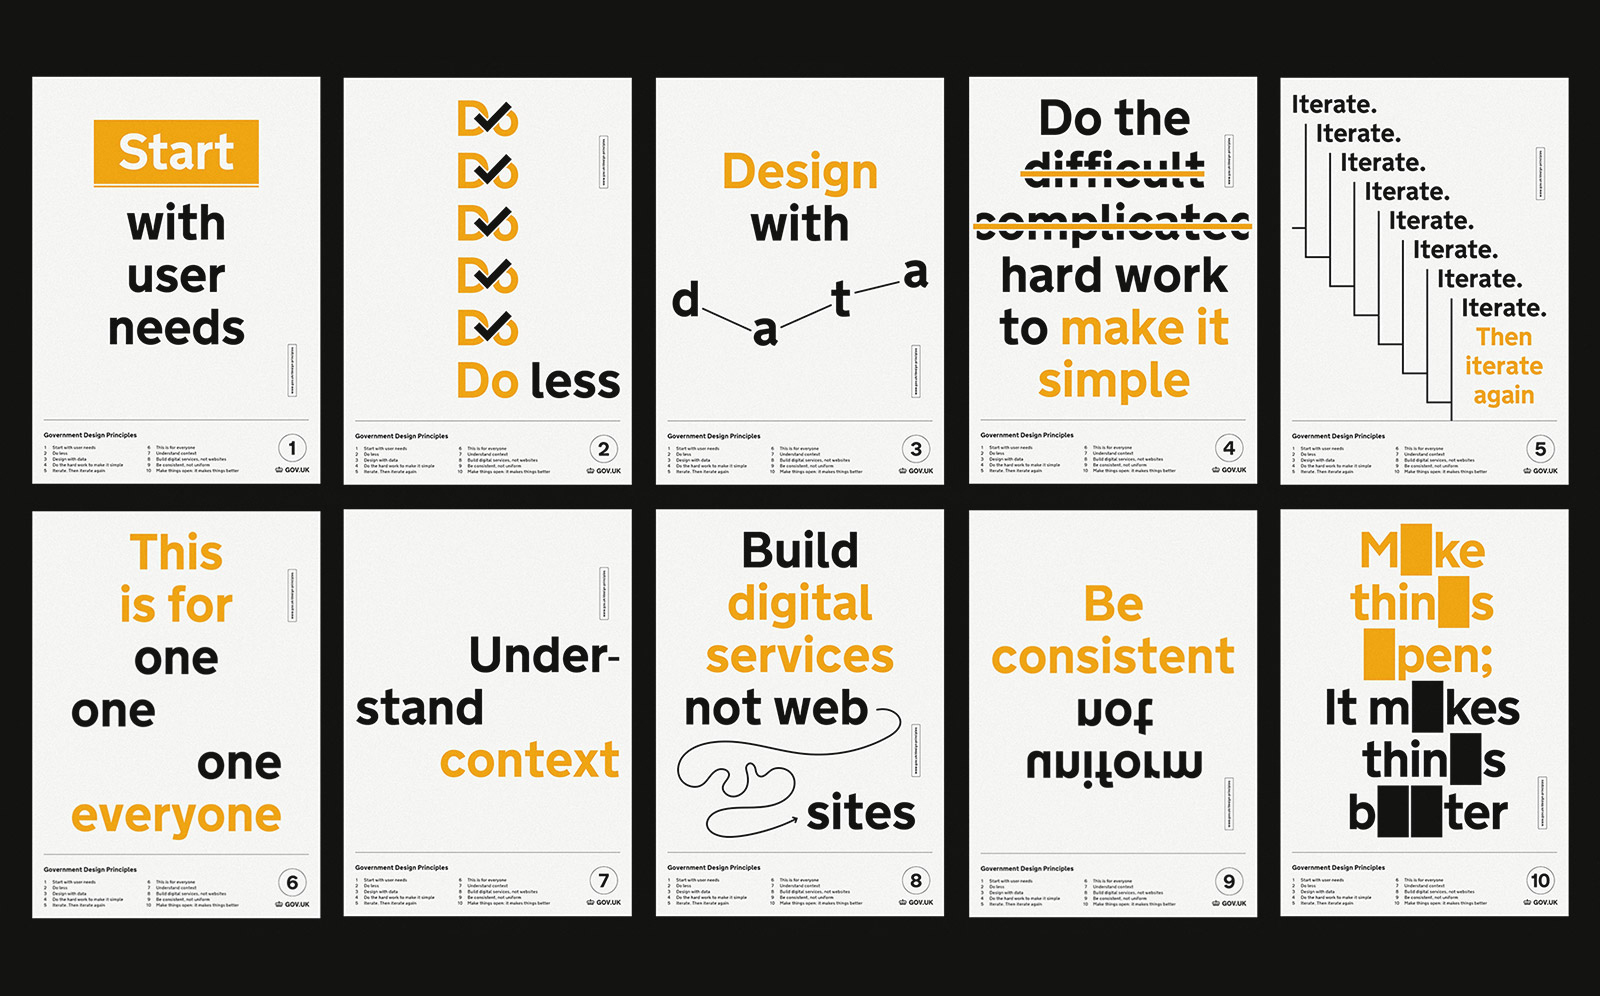 Start with user needs - Do less - Design with data - Do the hard work to make it simple - lterate. Then iterate again - This is for one one one everyone - Under-stand context - Build digital services not web sites - Be consistent not uniform - M■ke thin■s ■pen; It m■kes thin■s b■■ter